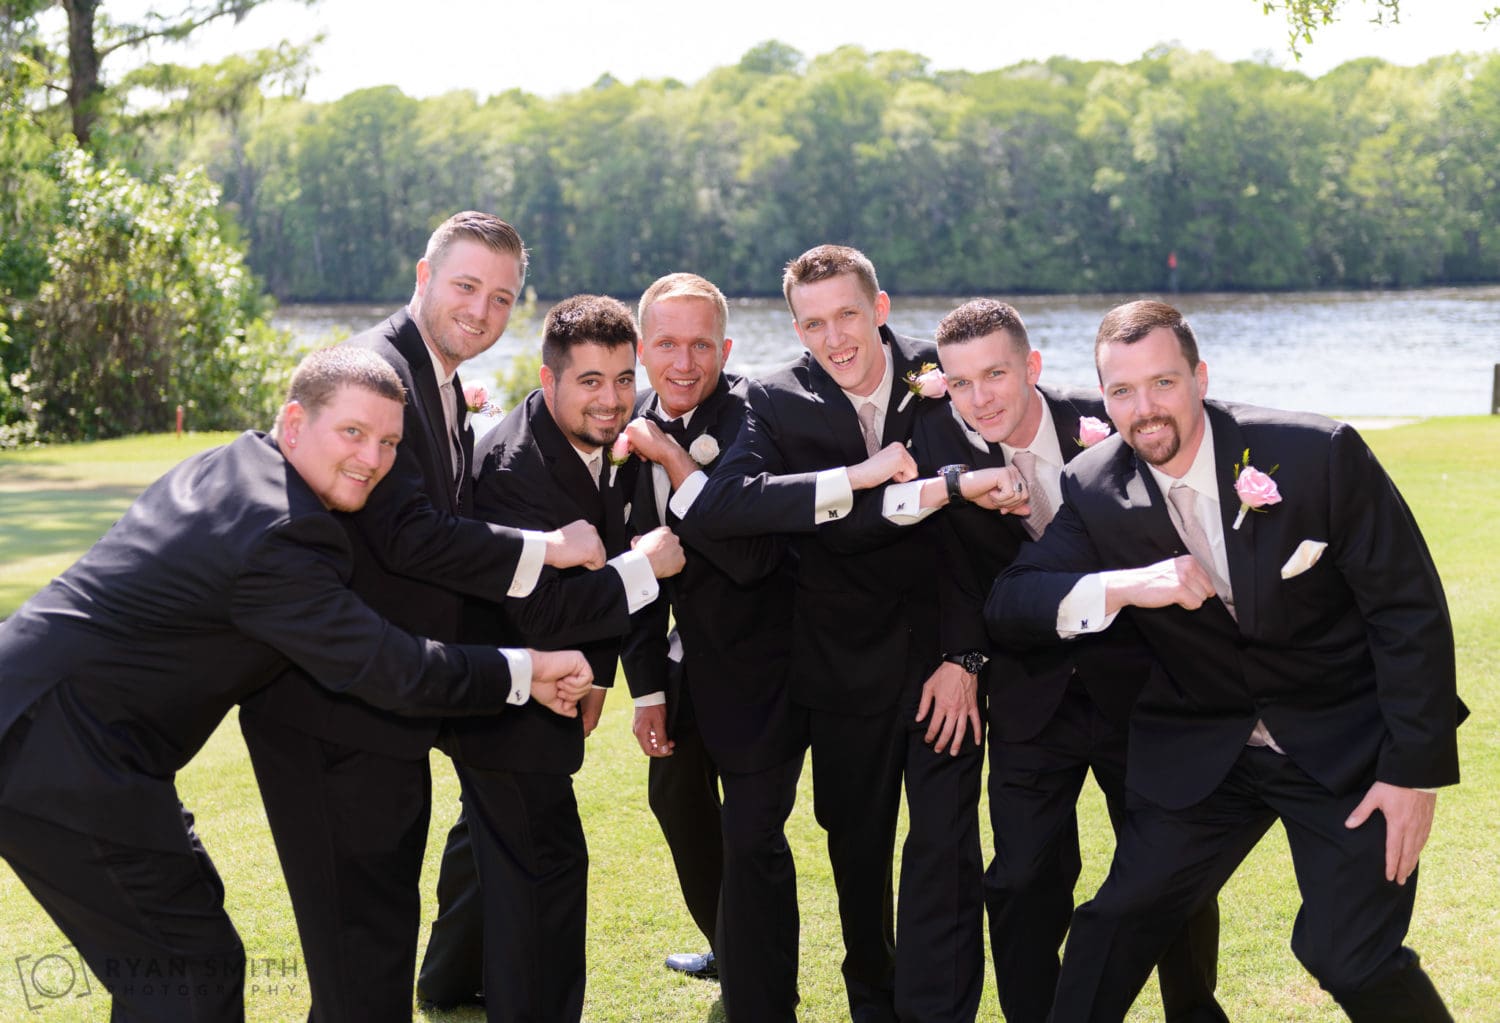 Pictures with groomsmen before the ceremony - Wachesaw Plantation